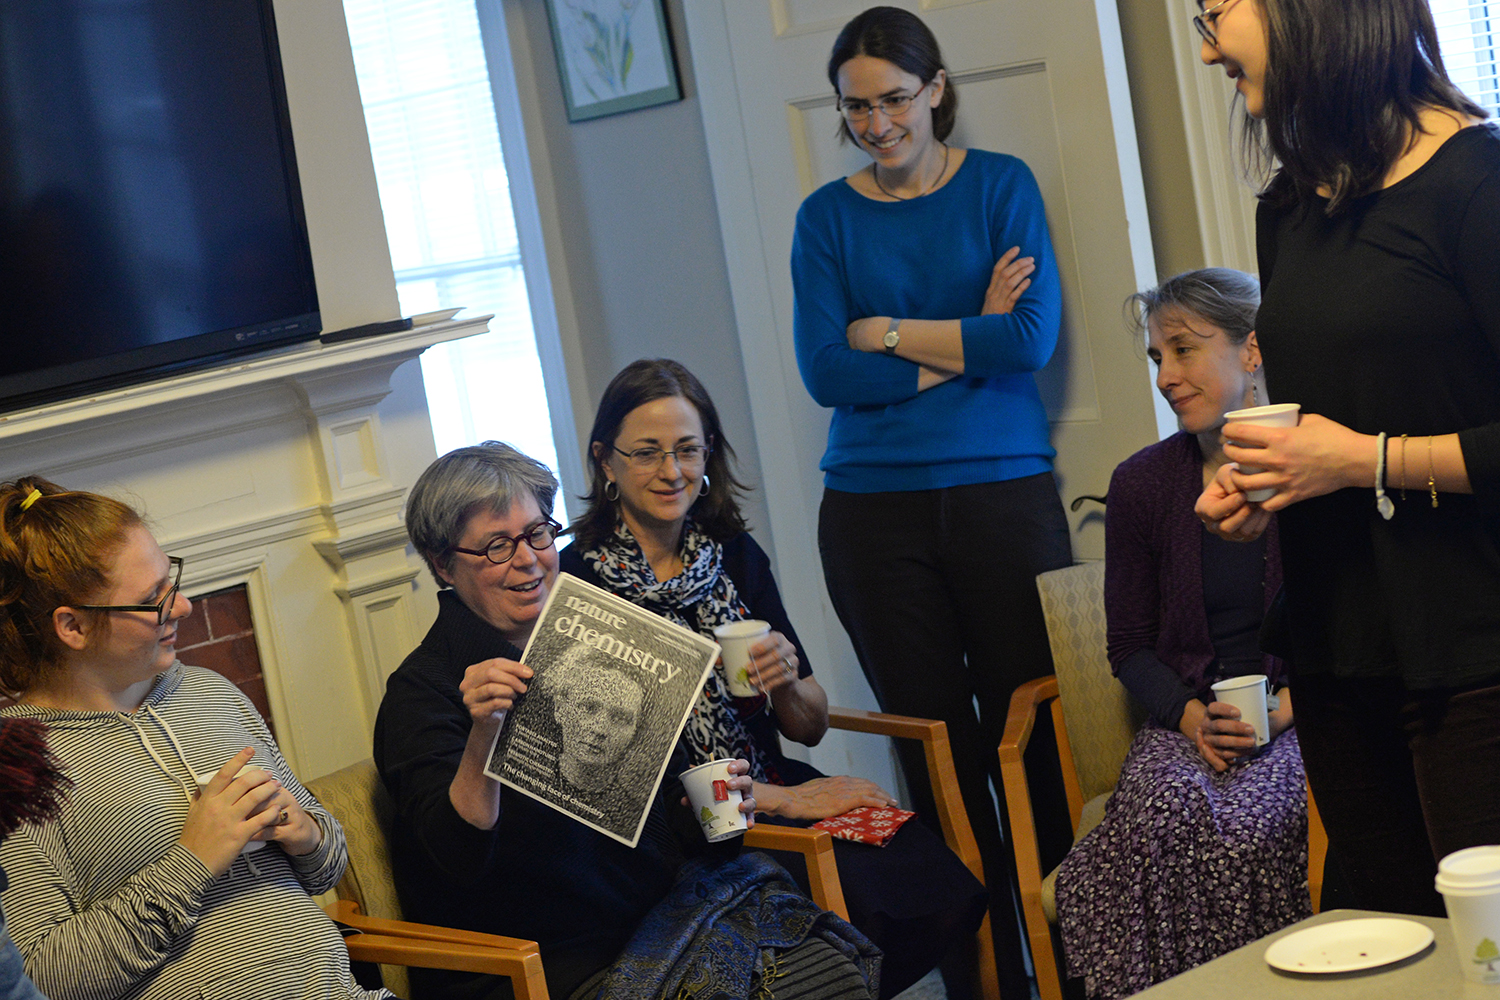 Michelle Francl, professor of chemistry on the Clowes Fund for Science and Public Policy at Bryn Mawr College, discusses her commentary entitled “Sex and the Citadel of Science" published in Nature Chemistry.  Professors Janice Naegele, Meredith Hughes, Amy MacQueen and students look on.